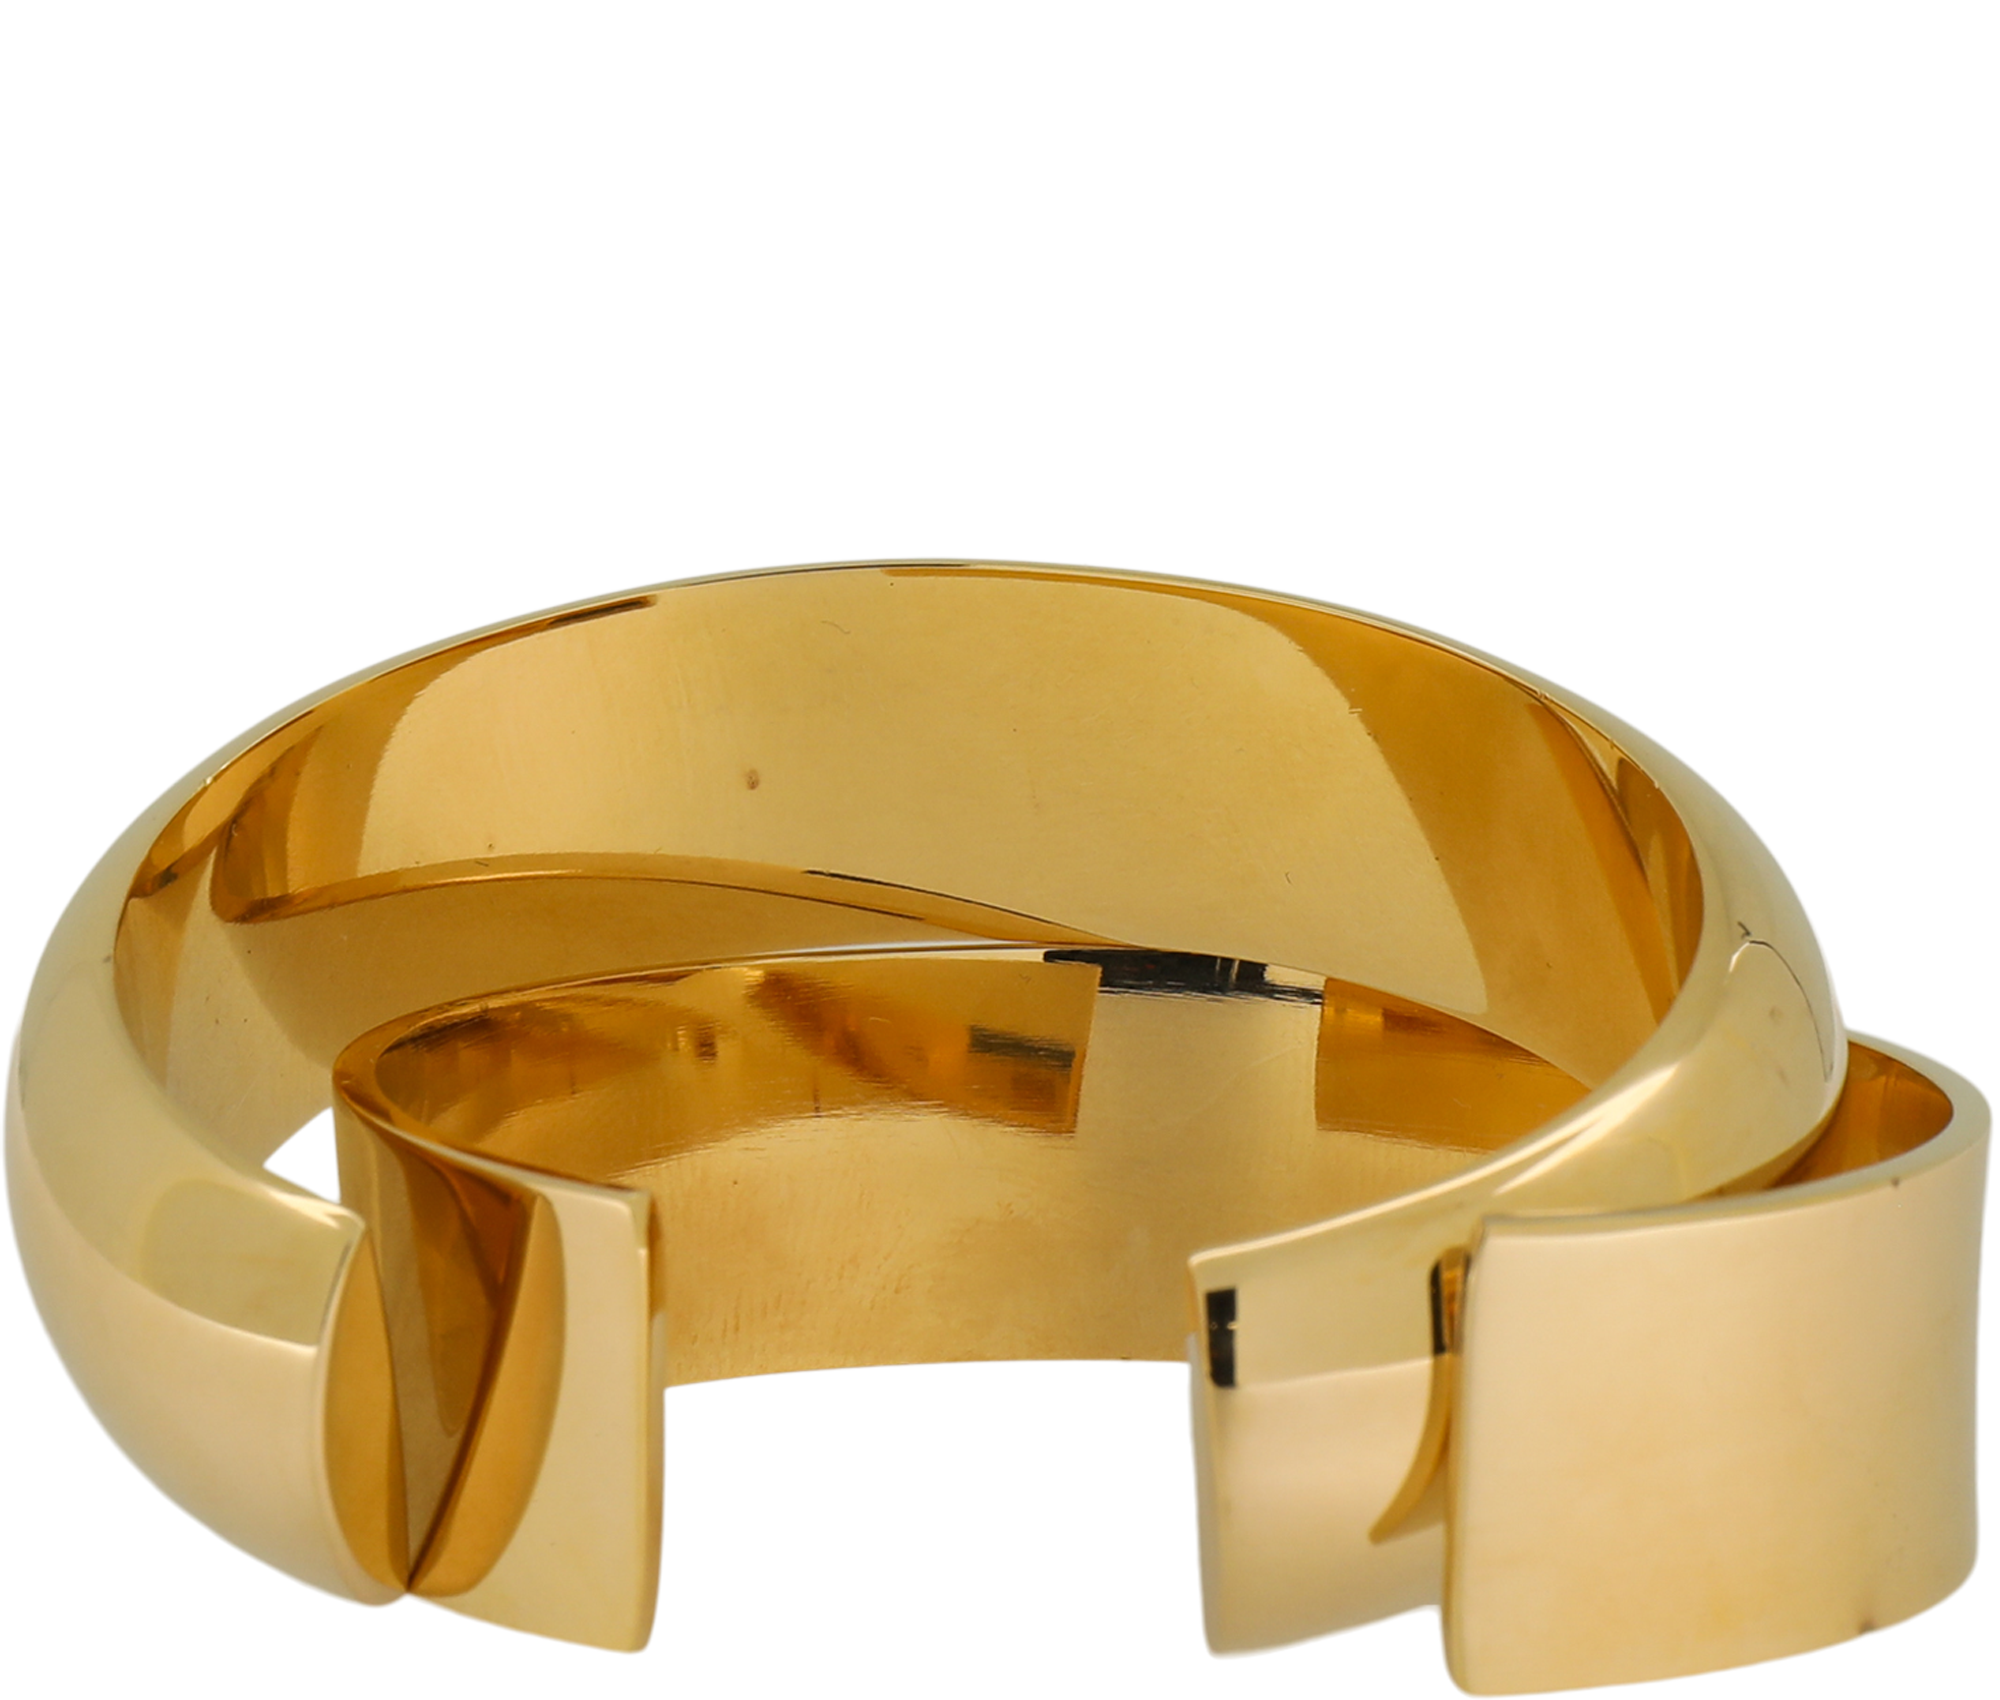 Sustainable Double Stack Cuffs - Keentu